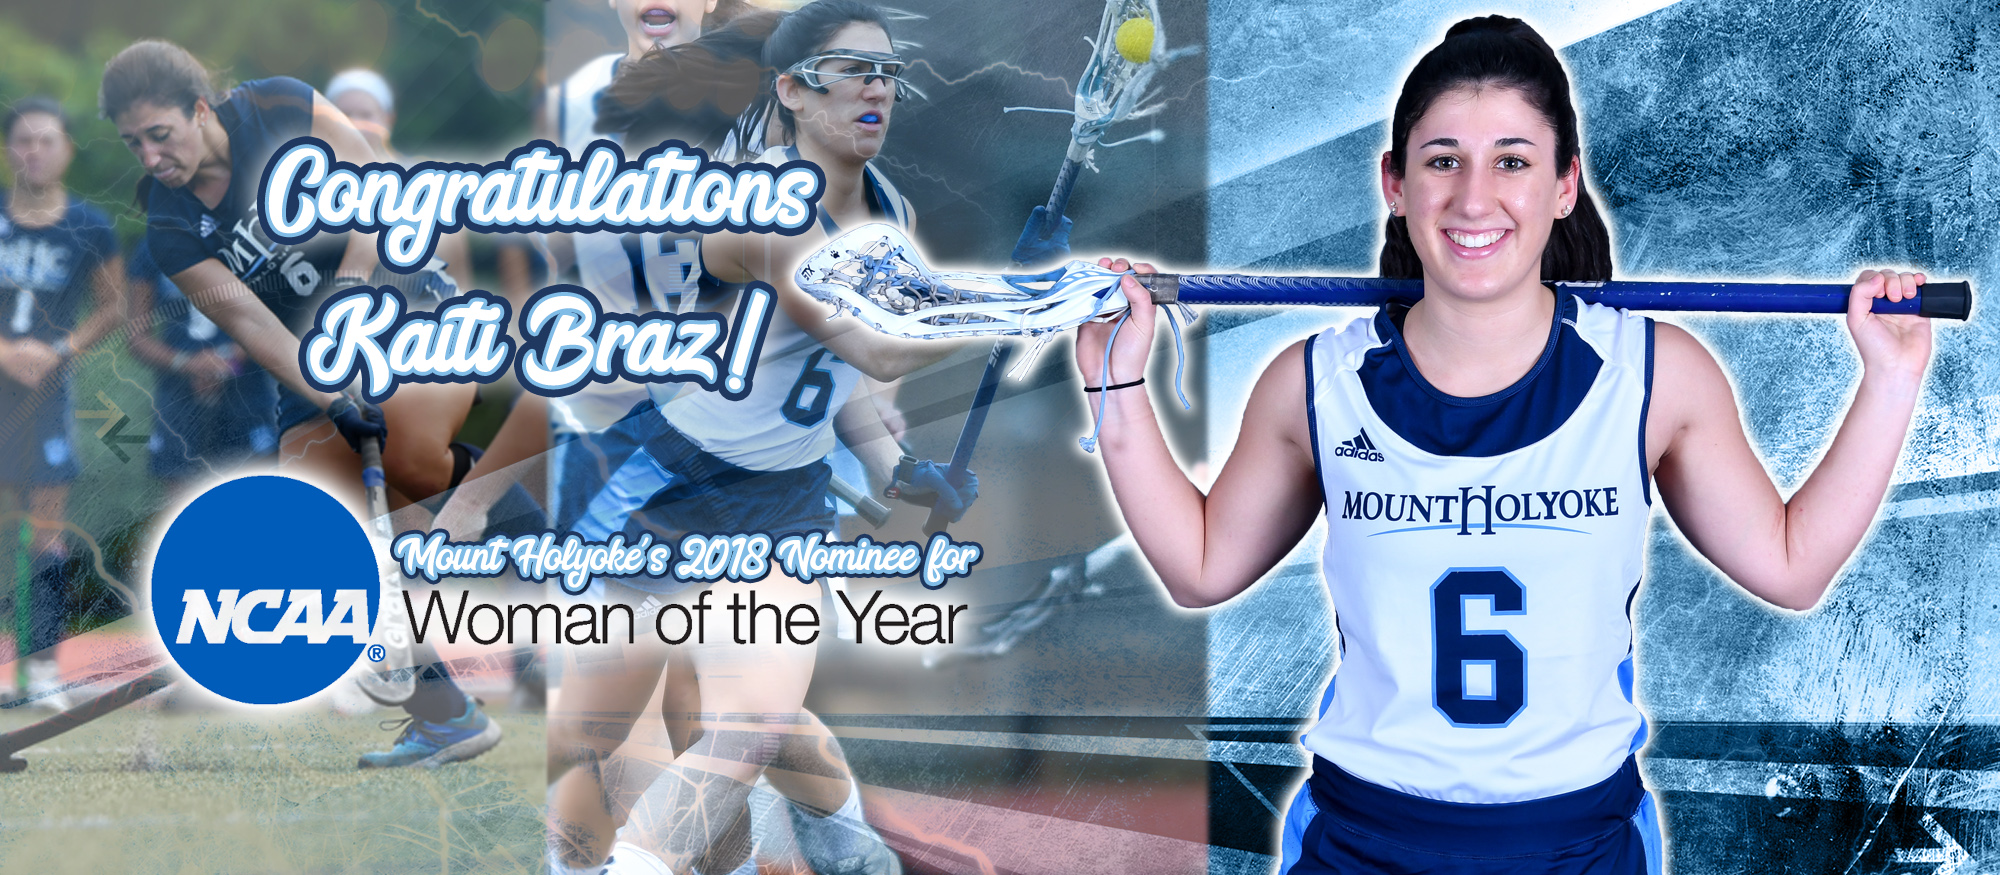 Photo depicting several images of former Lyons field hockey/lacrosse standout Kaitlin Braz '18 who was named MHC's selection for the 2018 NCAA Woman of the Year Award.